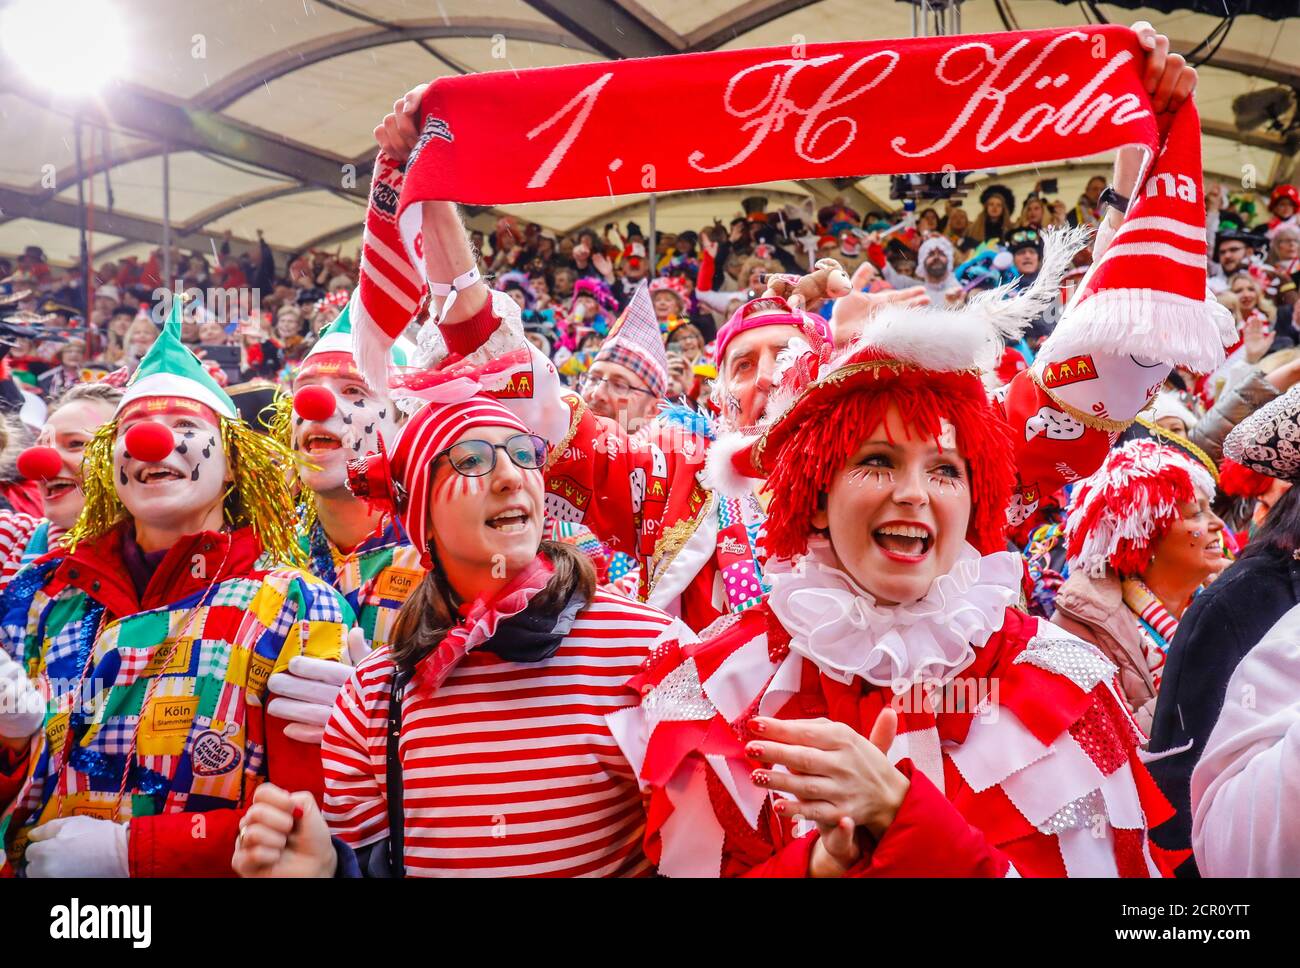 Colorfully costumed carnivalists celebrate Carnival in Cologne, on Weiberfastnacht the street carnival traditionally opens on the Alter Markt, which Stock Photo